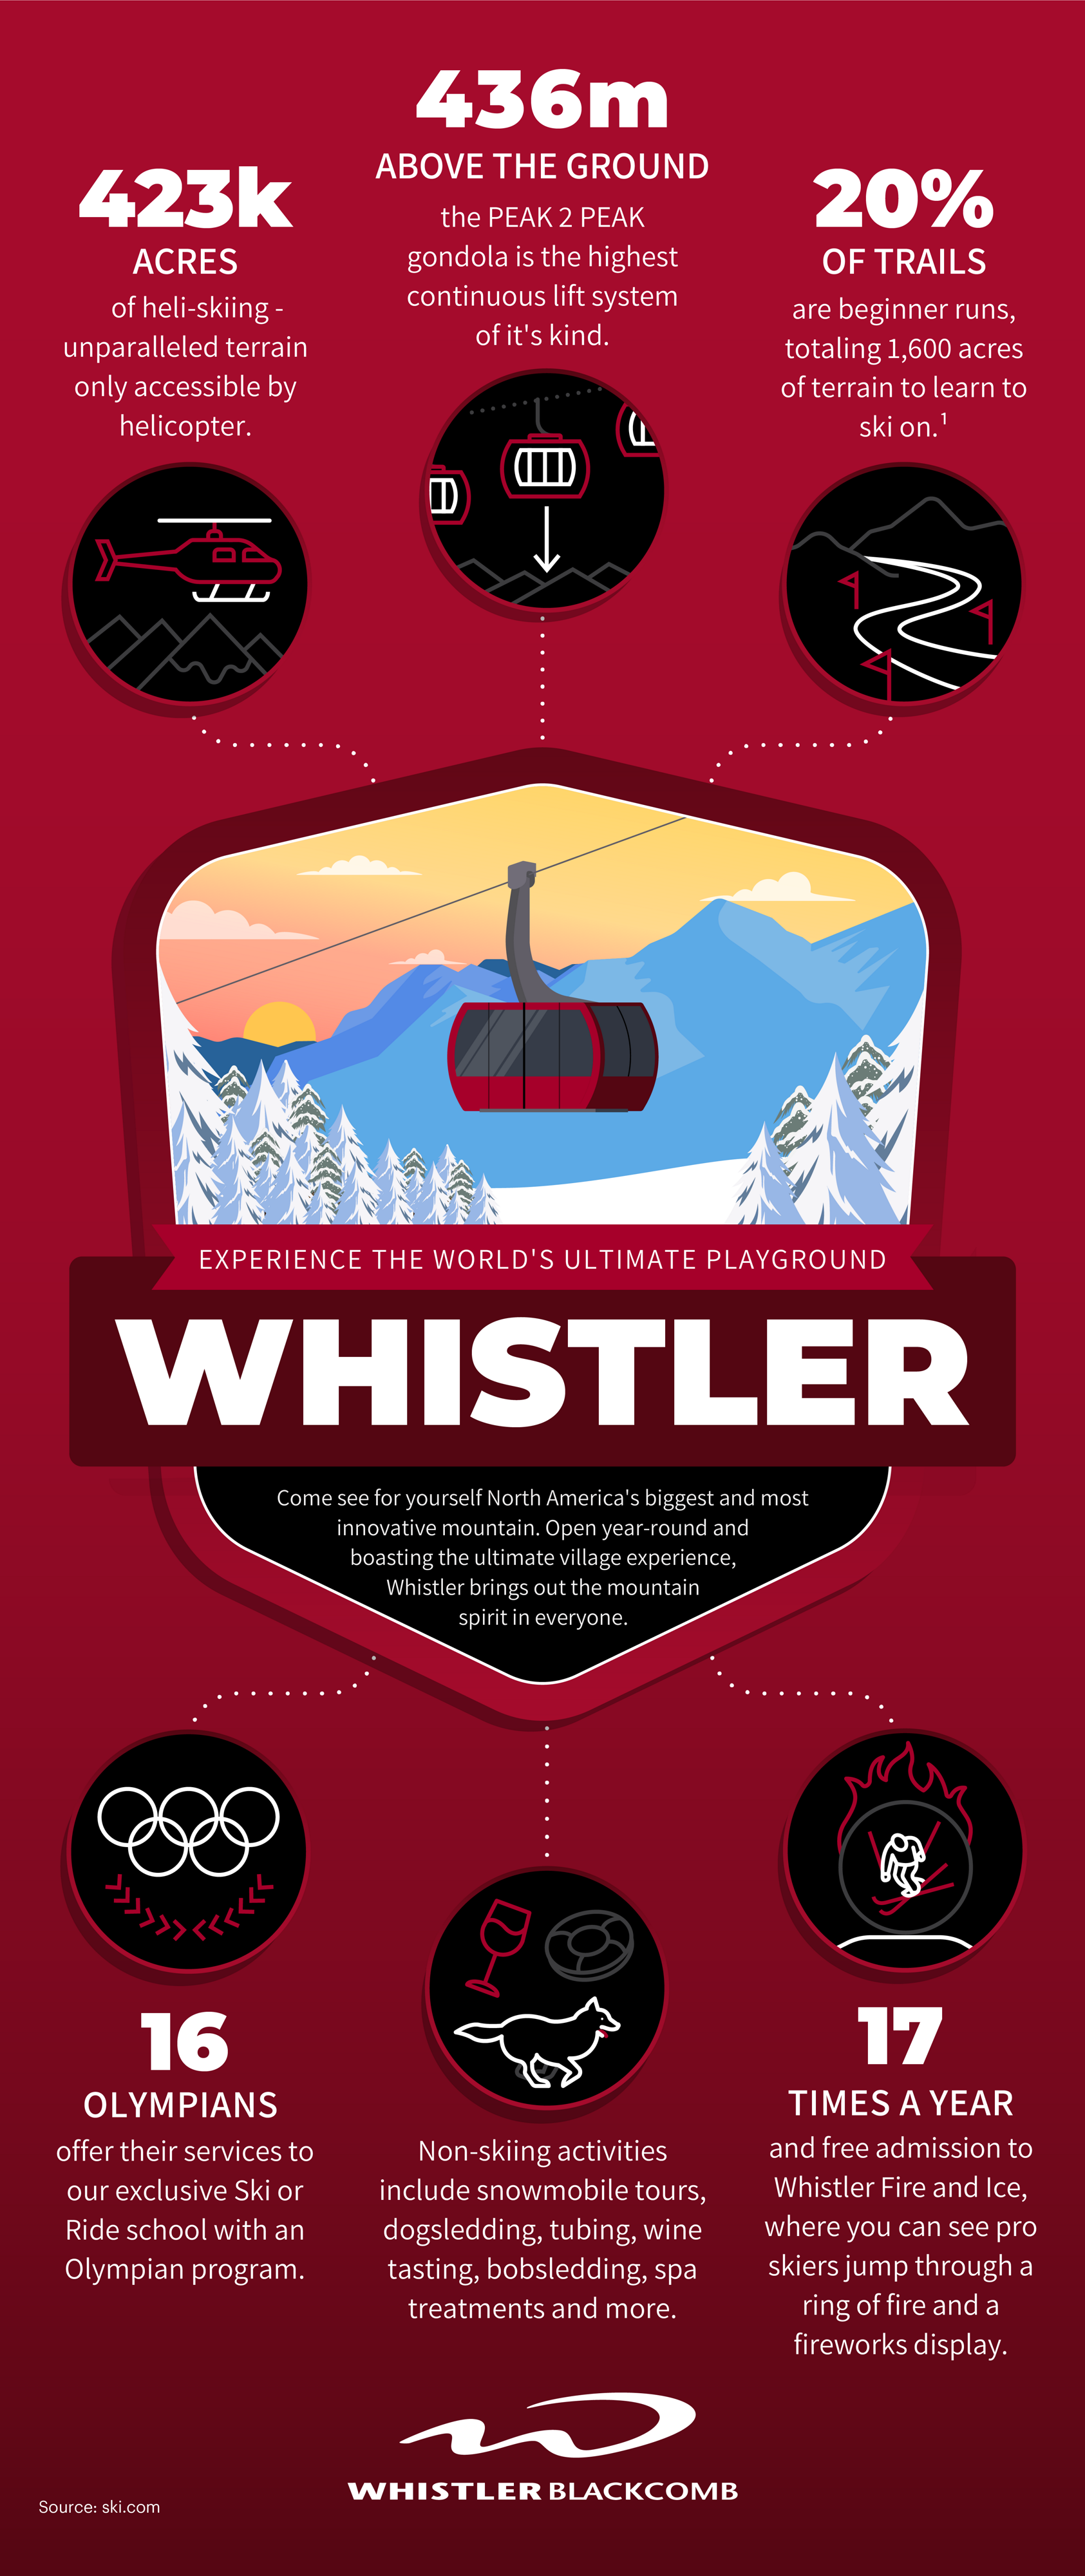 An infographic about Whistler Blackcomb ski resort with facts about the 1,600 acres of beginnger terrain, 423,000 acres and non-skiing activities.